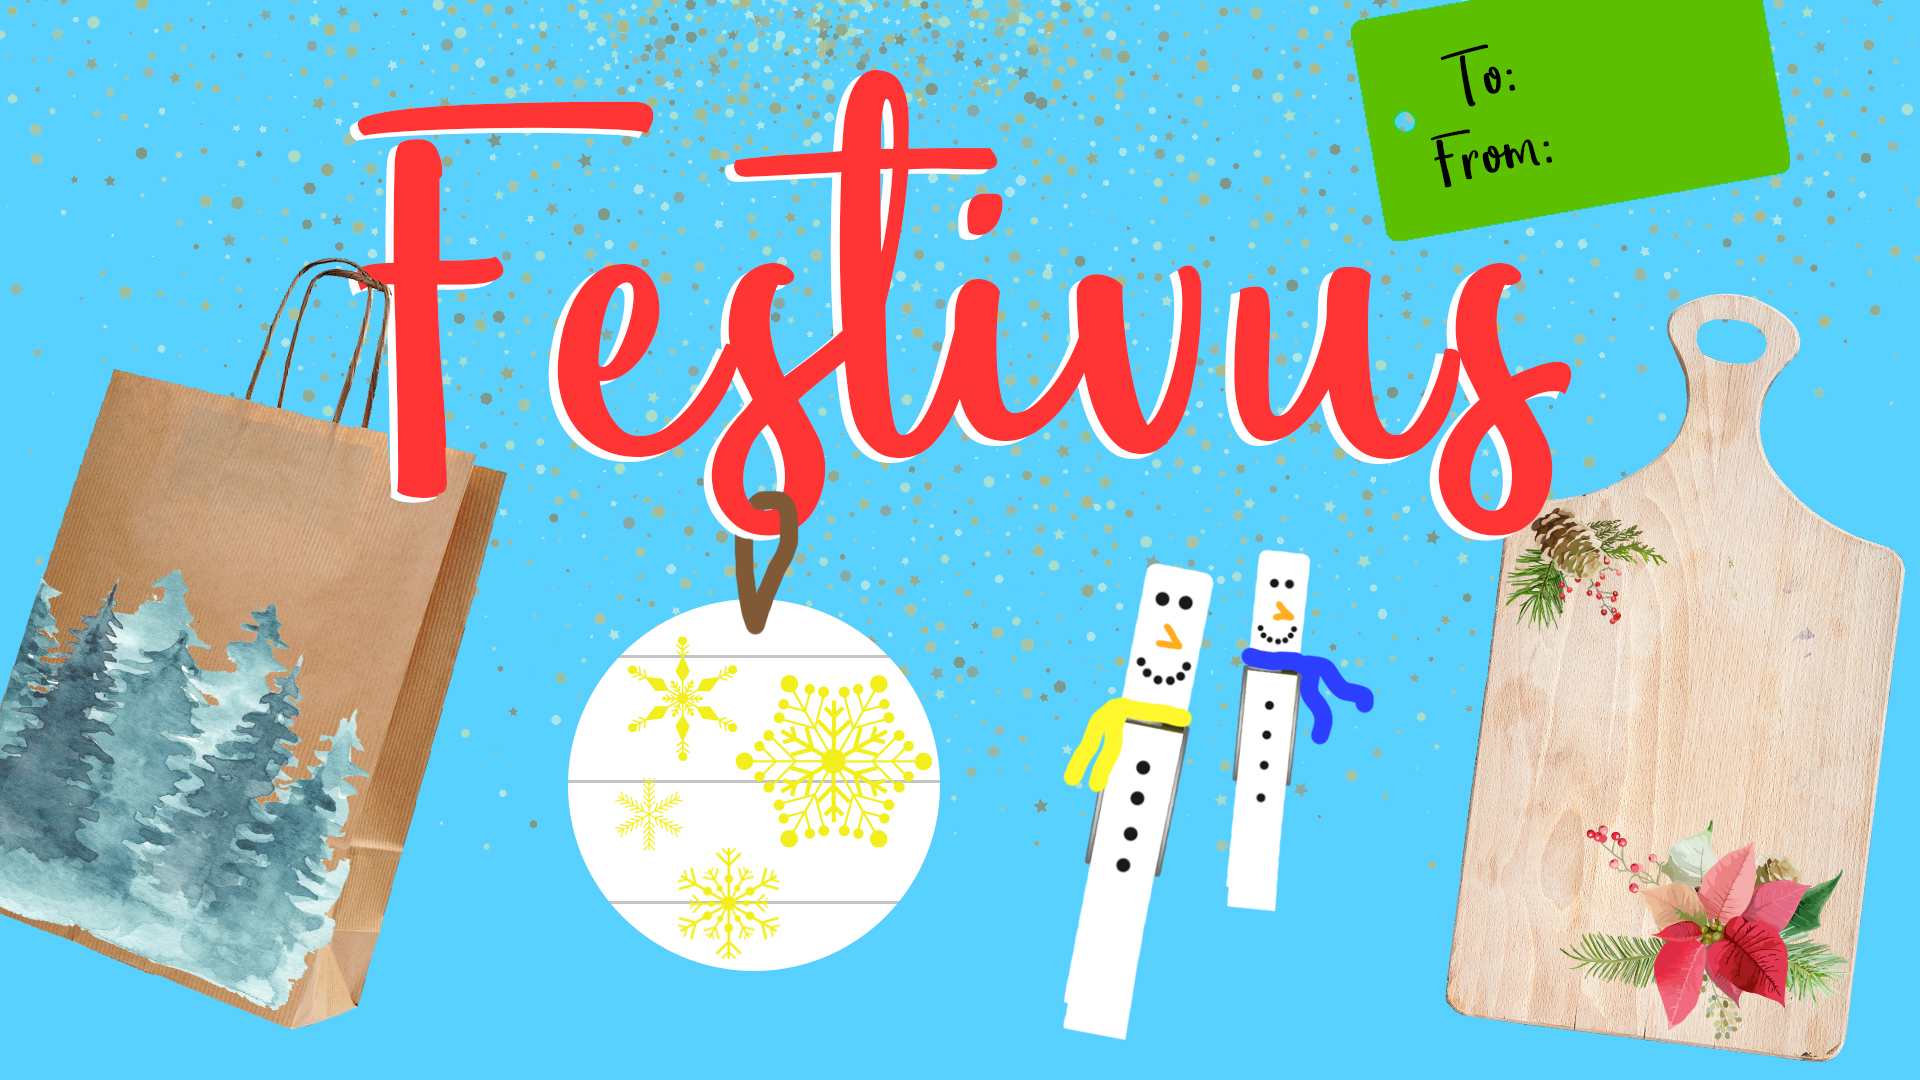 Image reads "Festivus" against a blue background. Crafts that will be done at the event are scattered among the image. The crafts include a gift bag, a shiplap ornament, clothes pin snowpeople, a cutting board, and a gift tag.